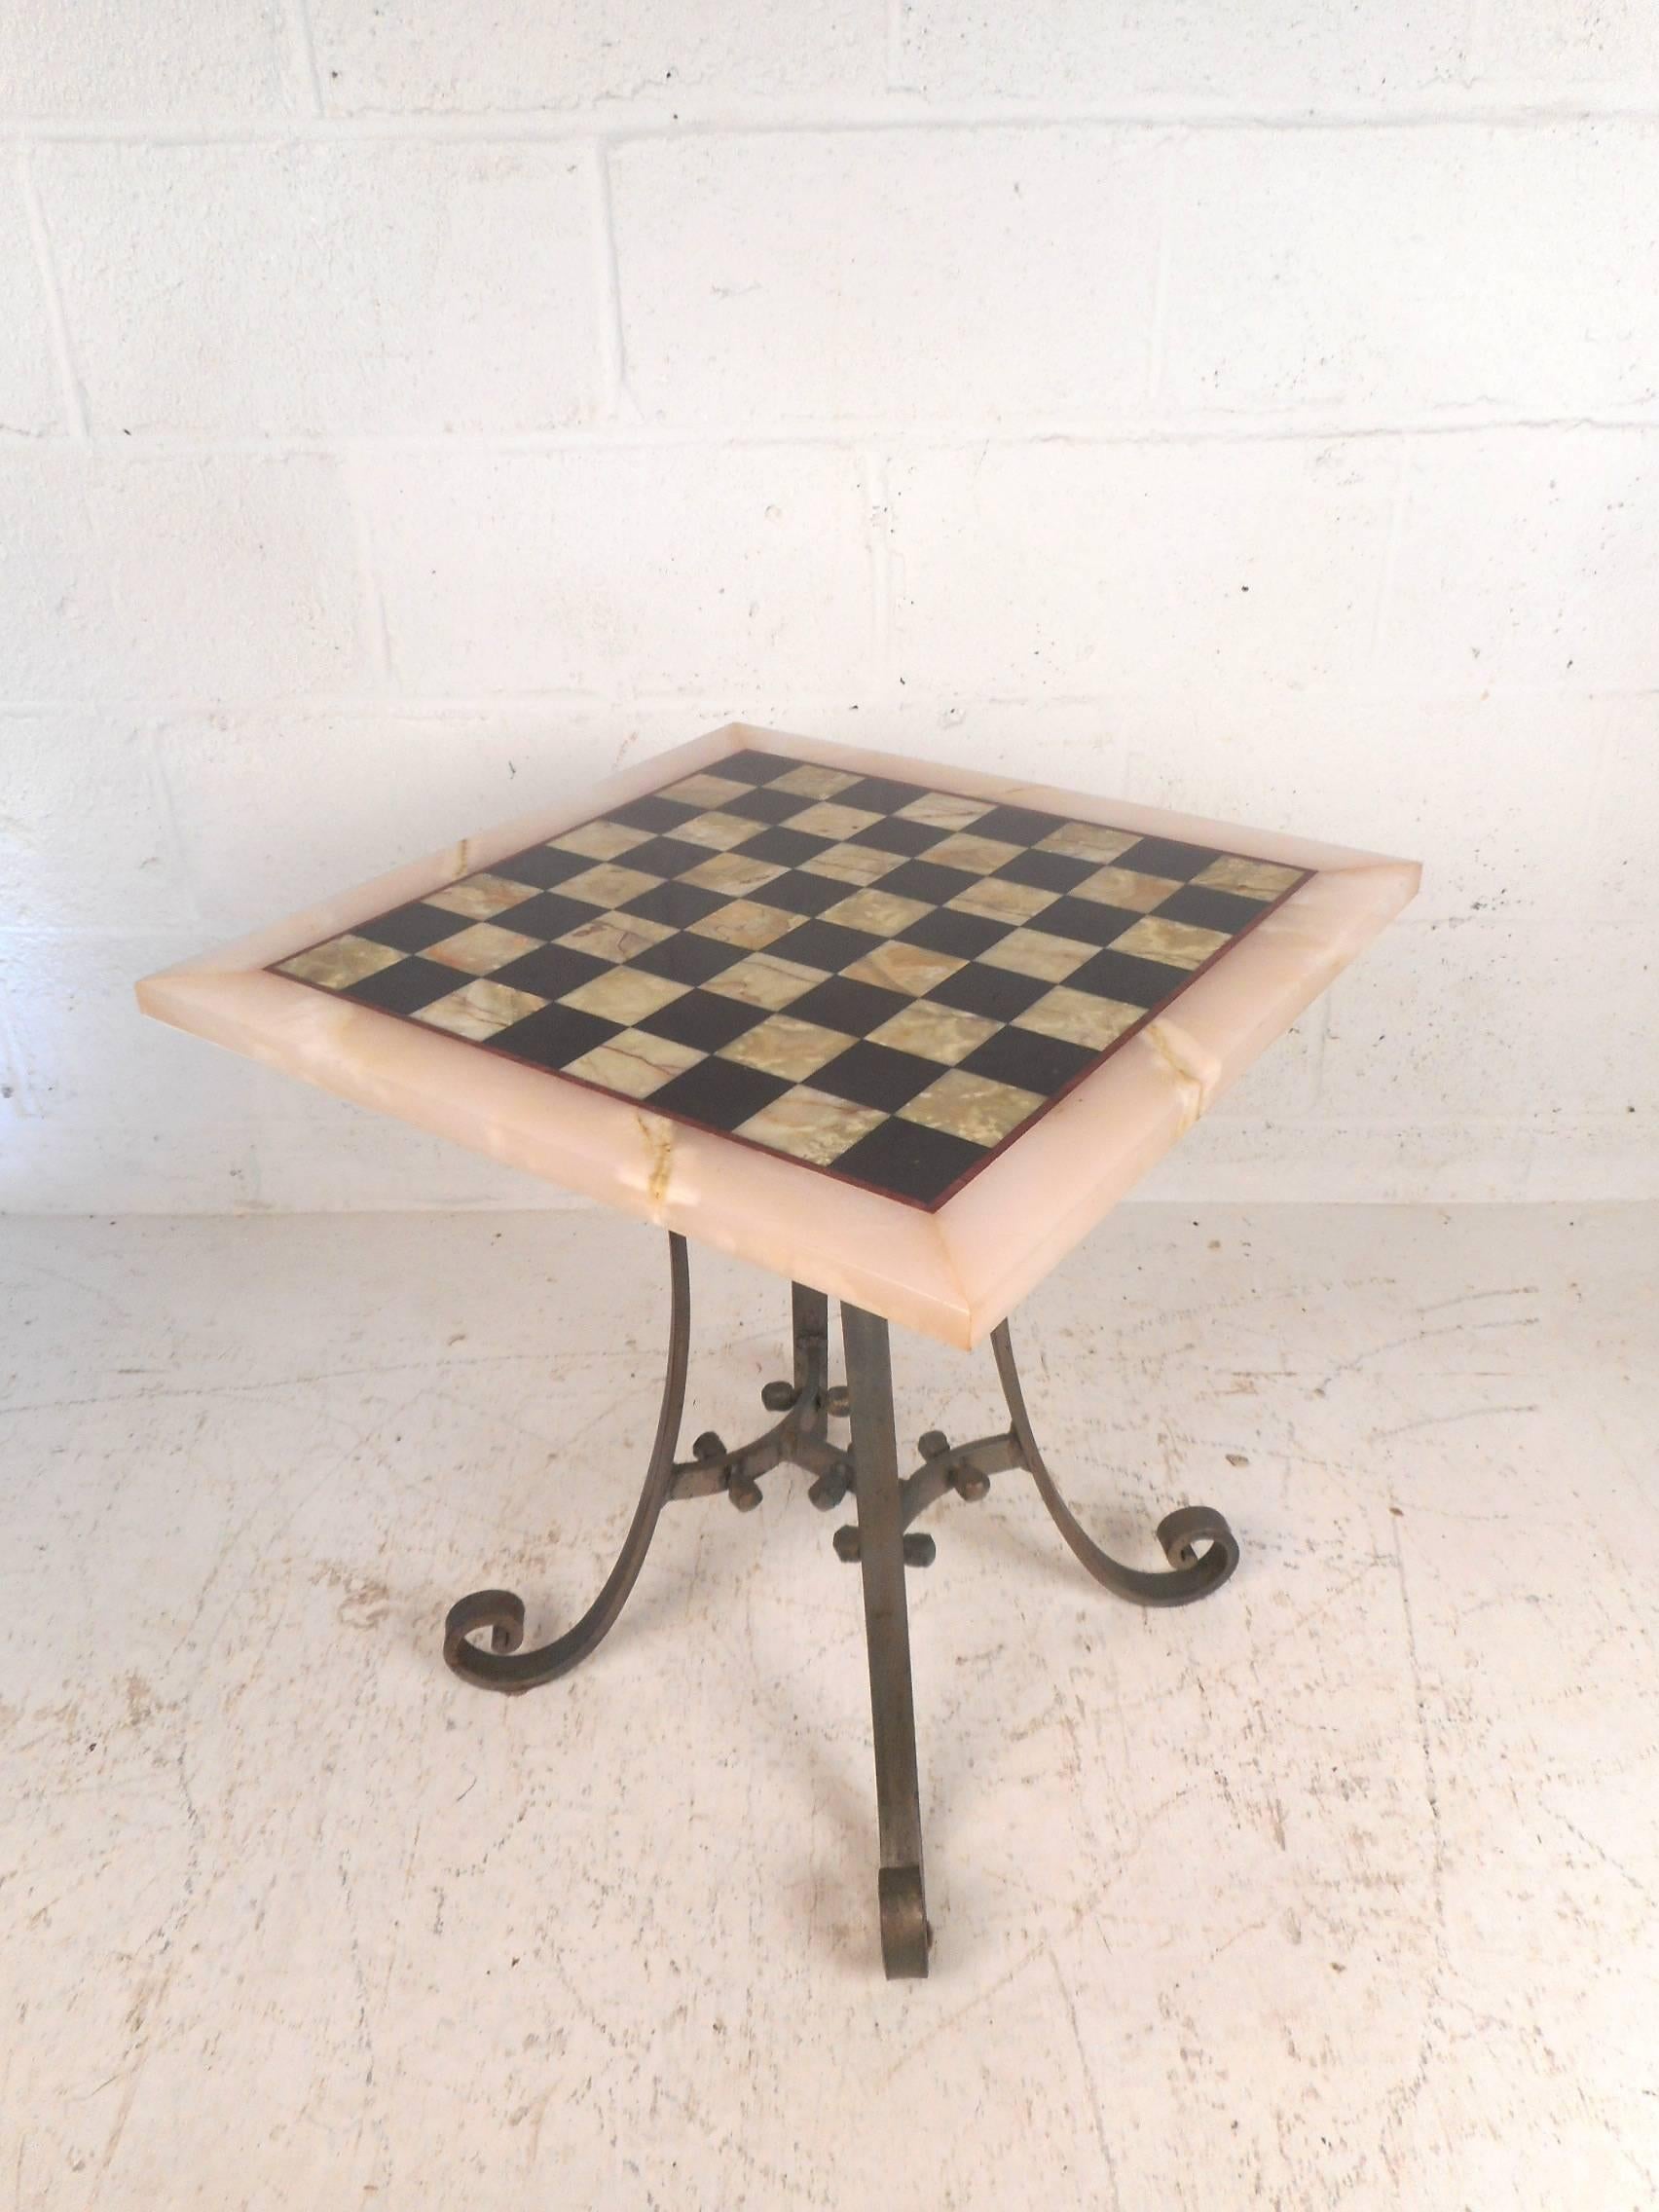 A stunning midcentury game table with a heavy cast iron base. This unique side table has a marble top with a chessboard inlay on it. A flat bar iron base with scroll detail holds up the heavy marble top. A great design that can function as a